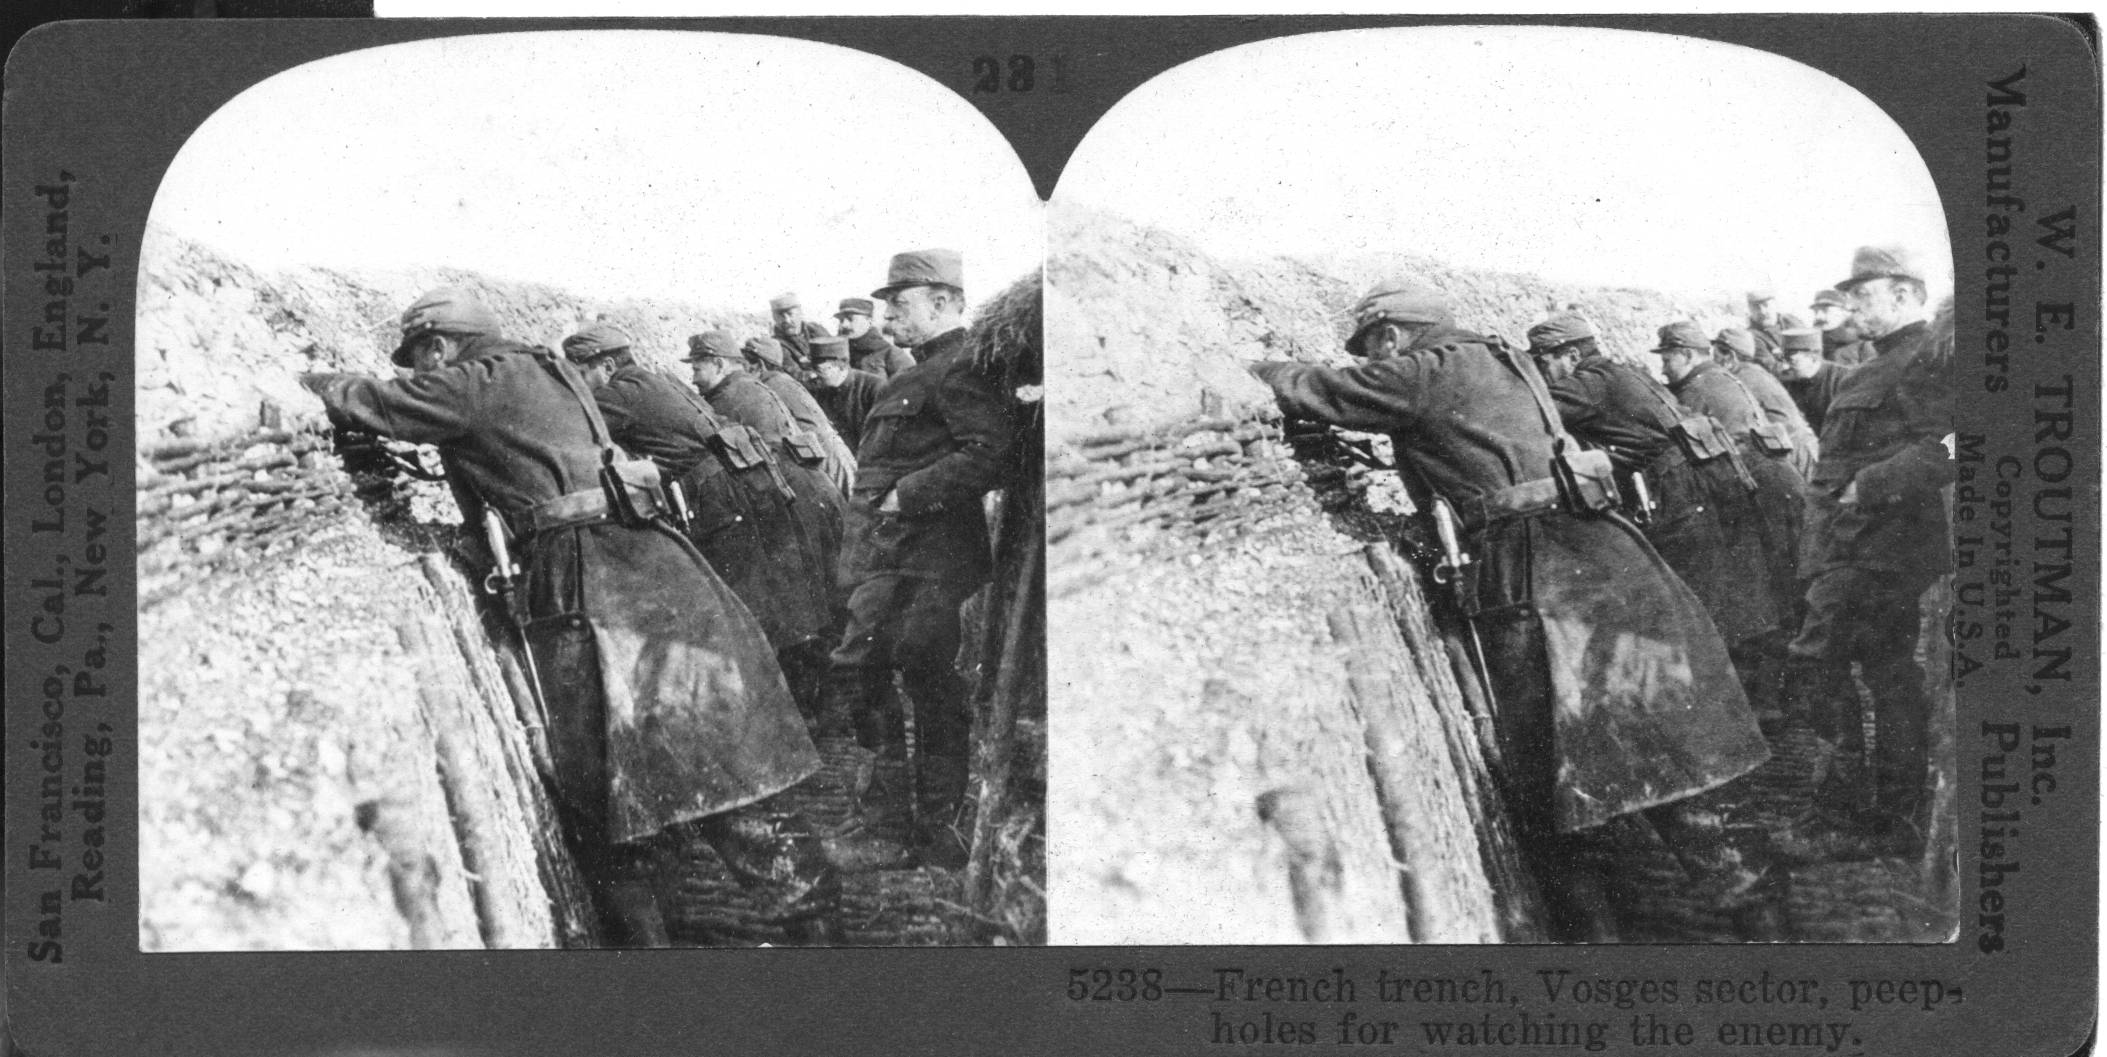 French trench, Vosges sector, peepholes for watching the enemy